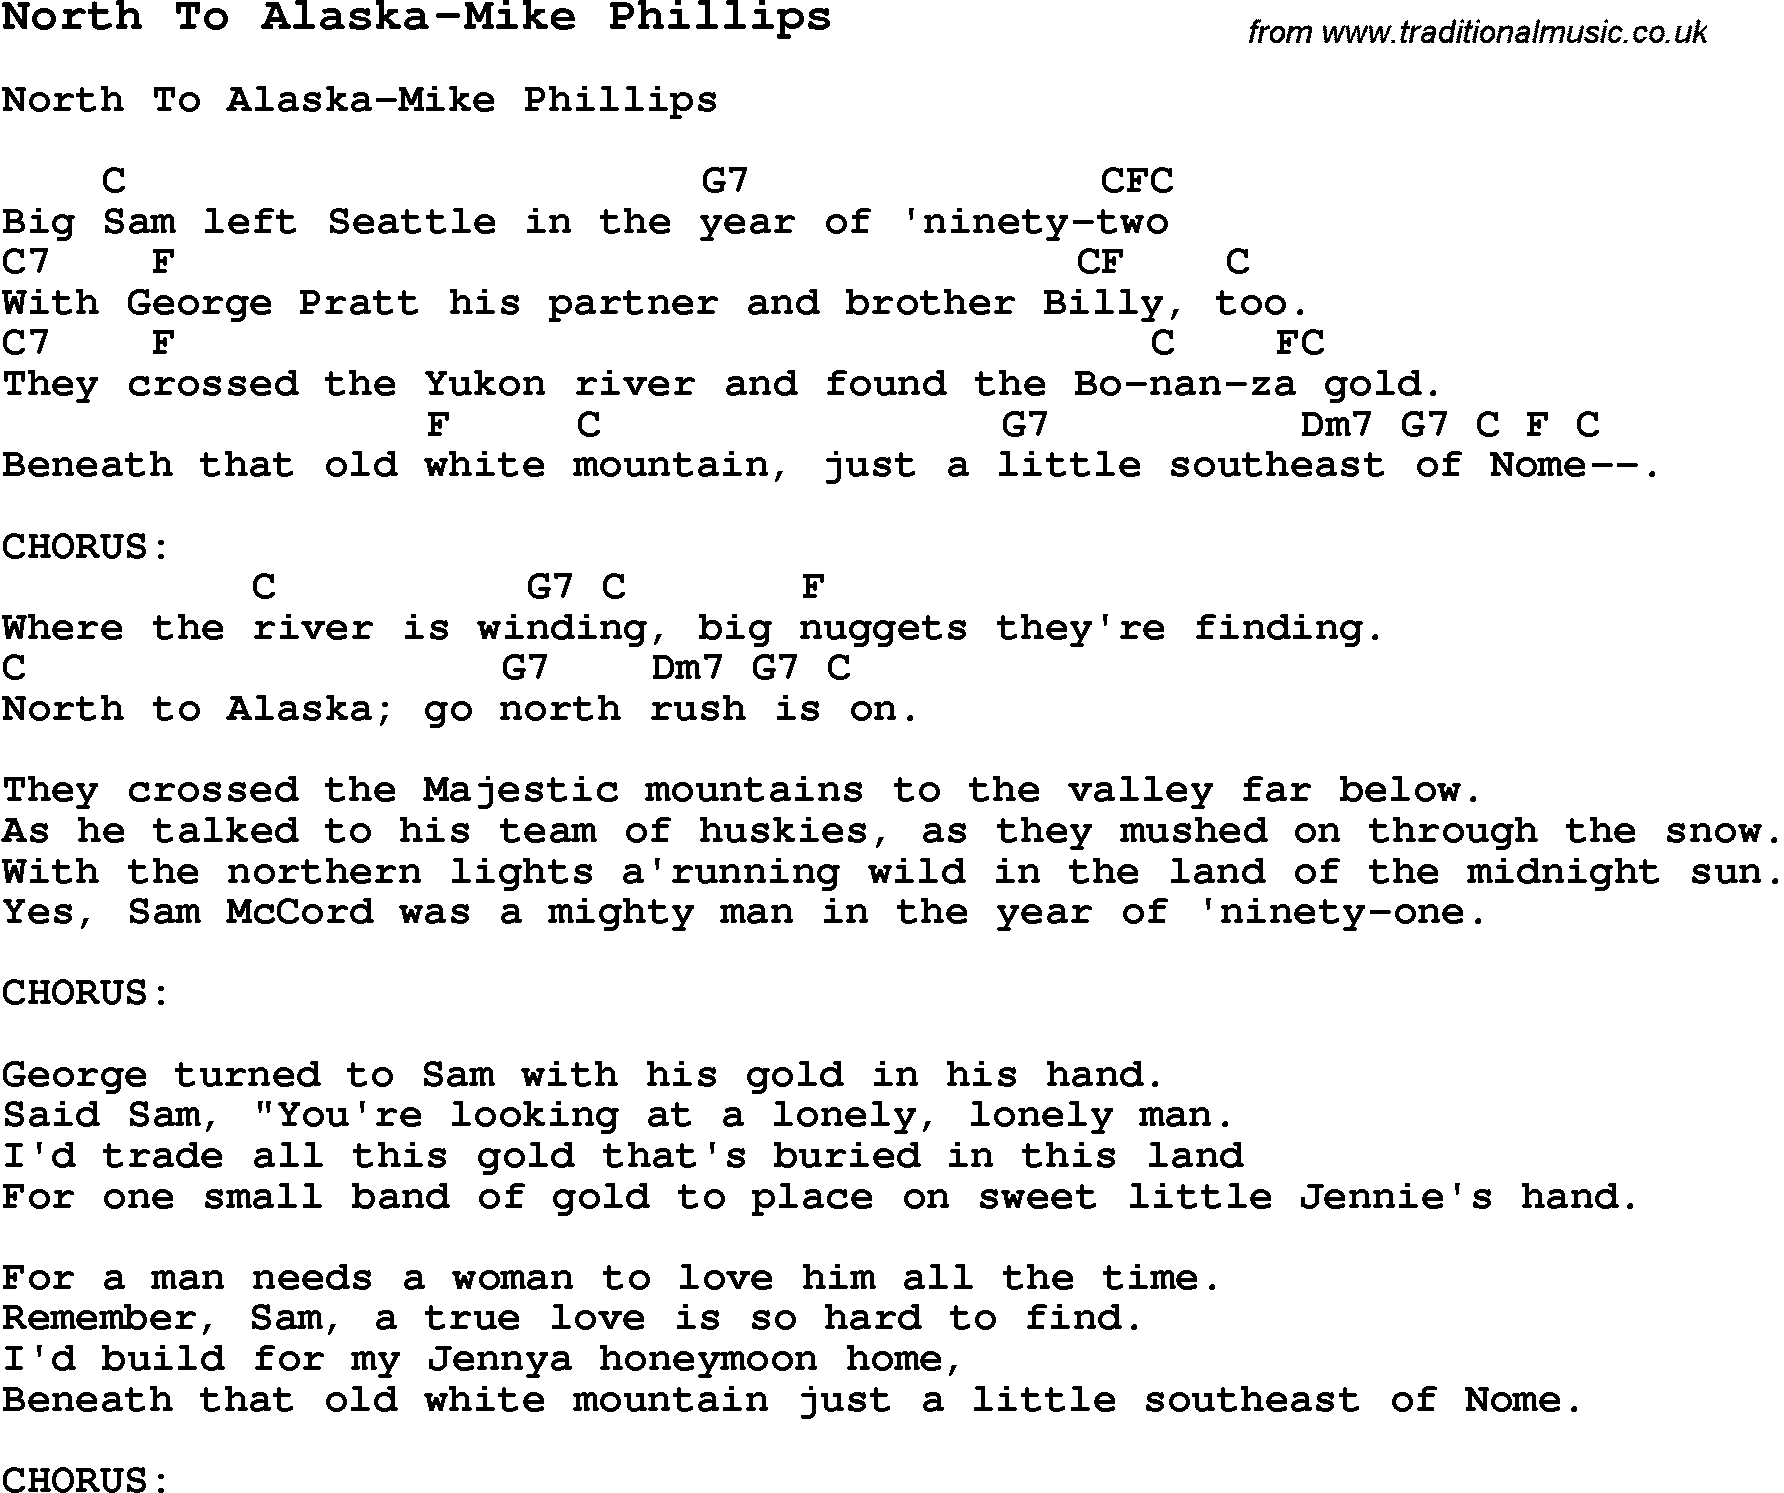 Summer-Camp Song, North To Alaska-Mike Phillips, with lyrics and chords for Ukulele, Guitar Banjo etc.